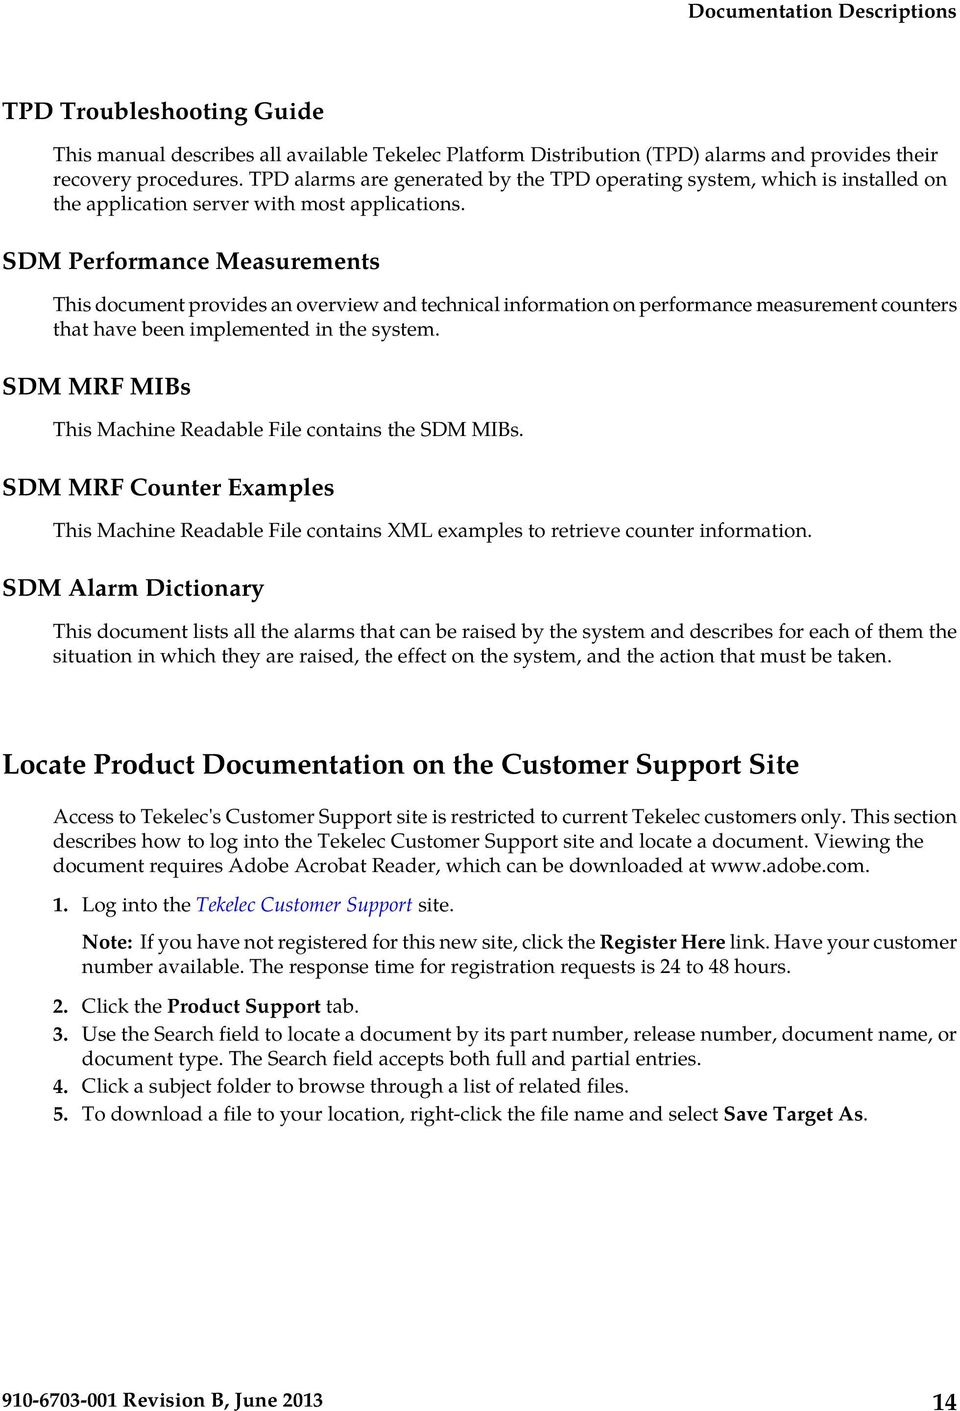 SDM Performance Measurements This document provides an overview and technical information on performance measurement counters that have been implemented in the system.